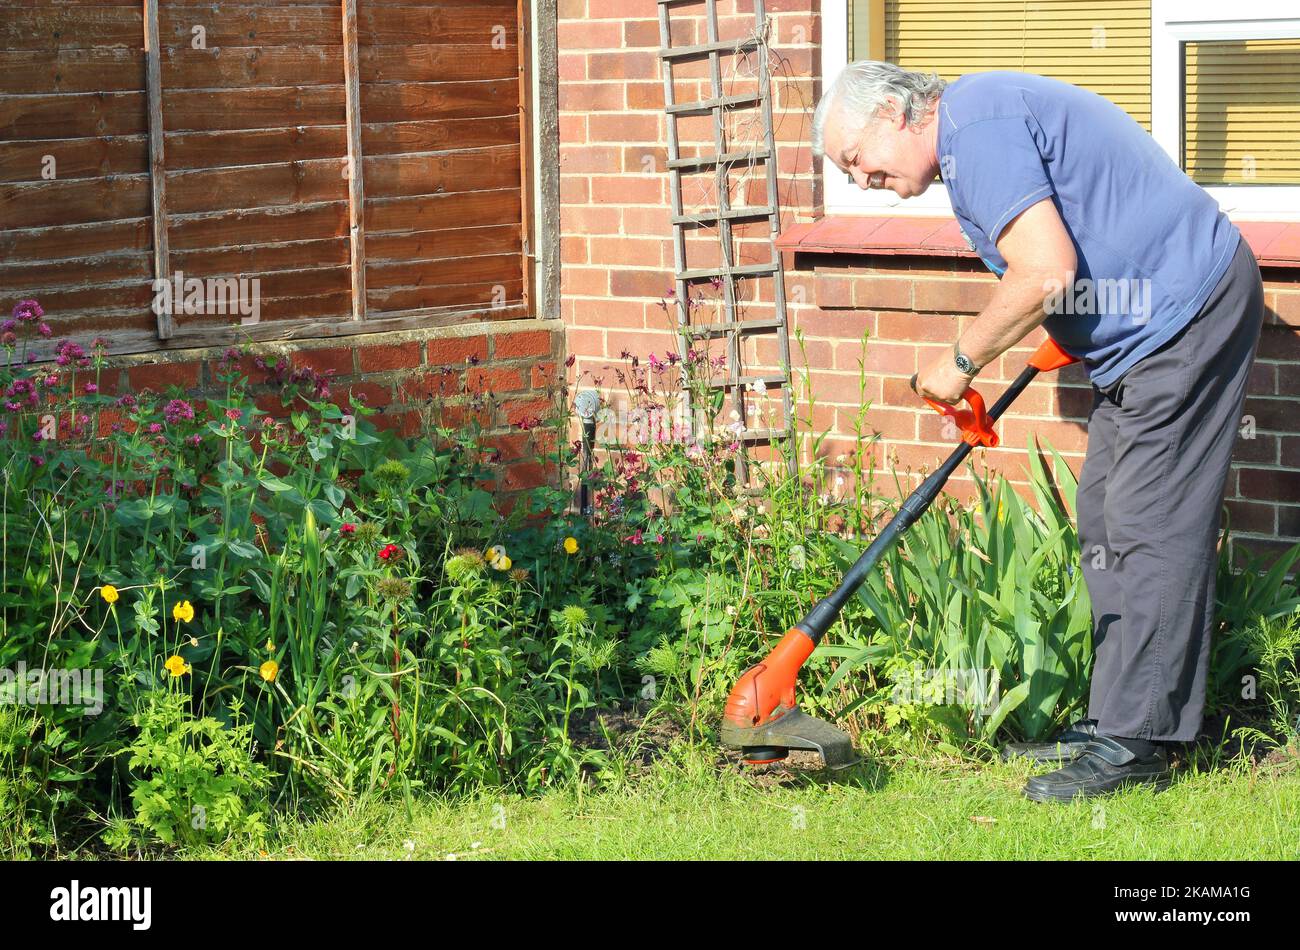 Senior man happy strimming his garden. Using strimmer to cut down grass or weeds. Stock Photo